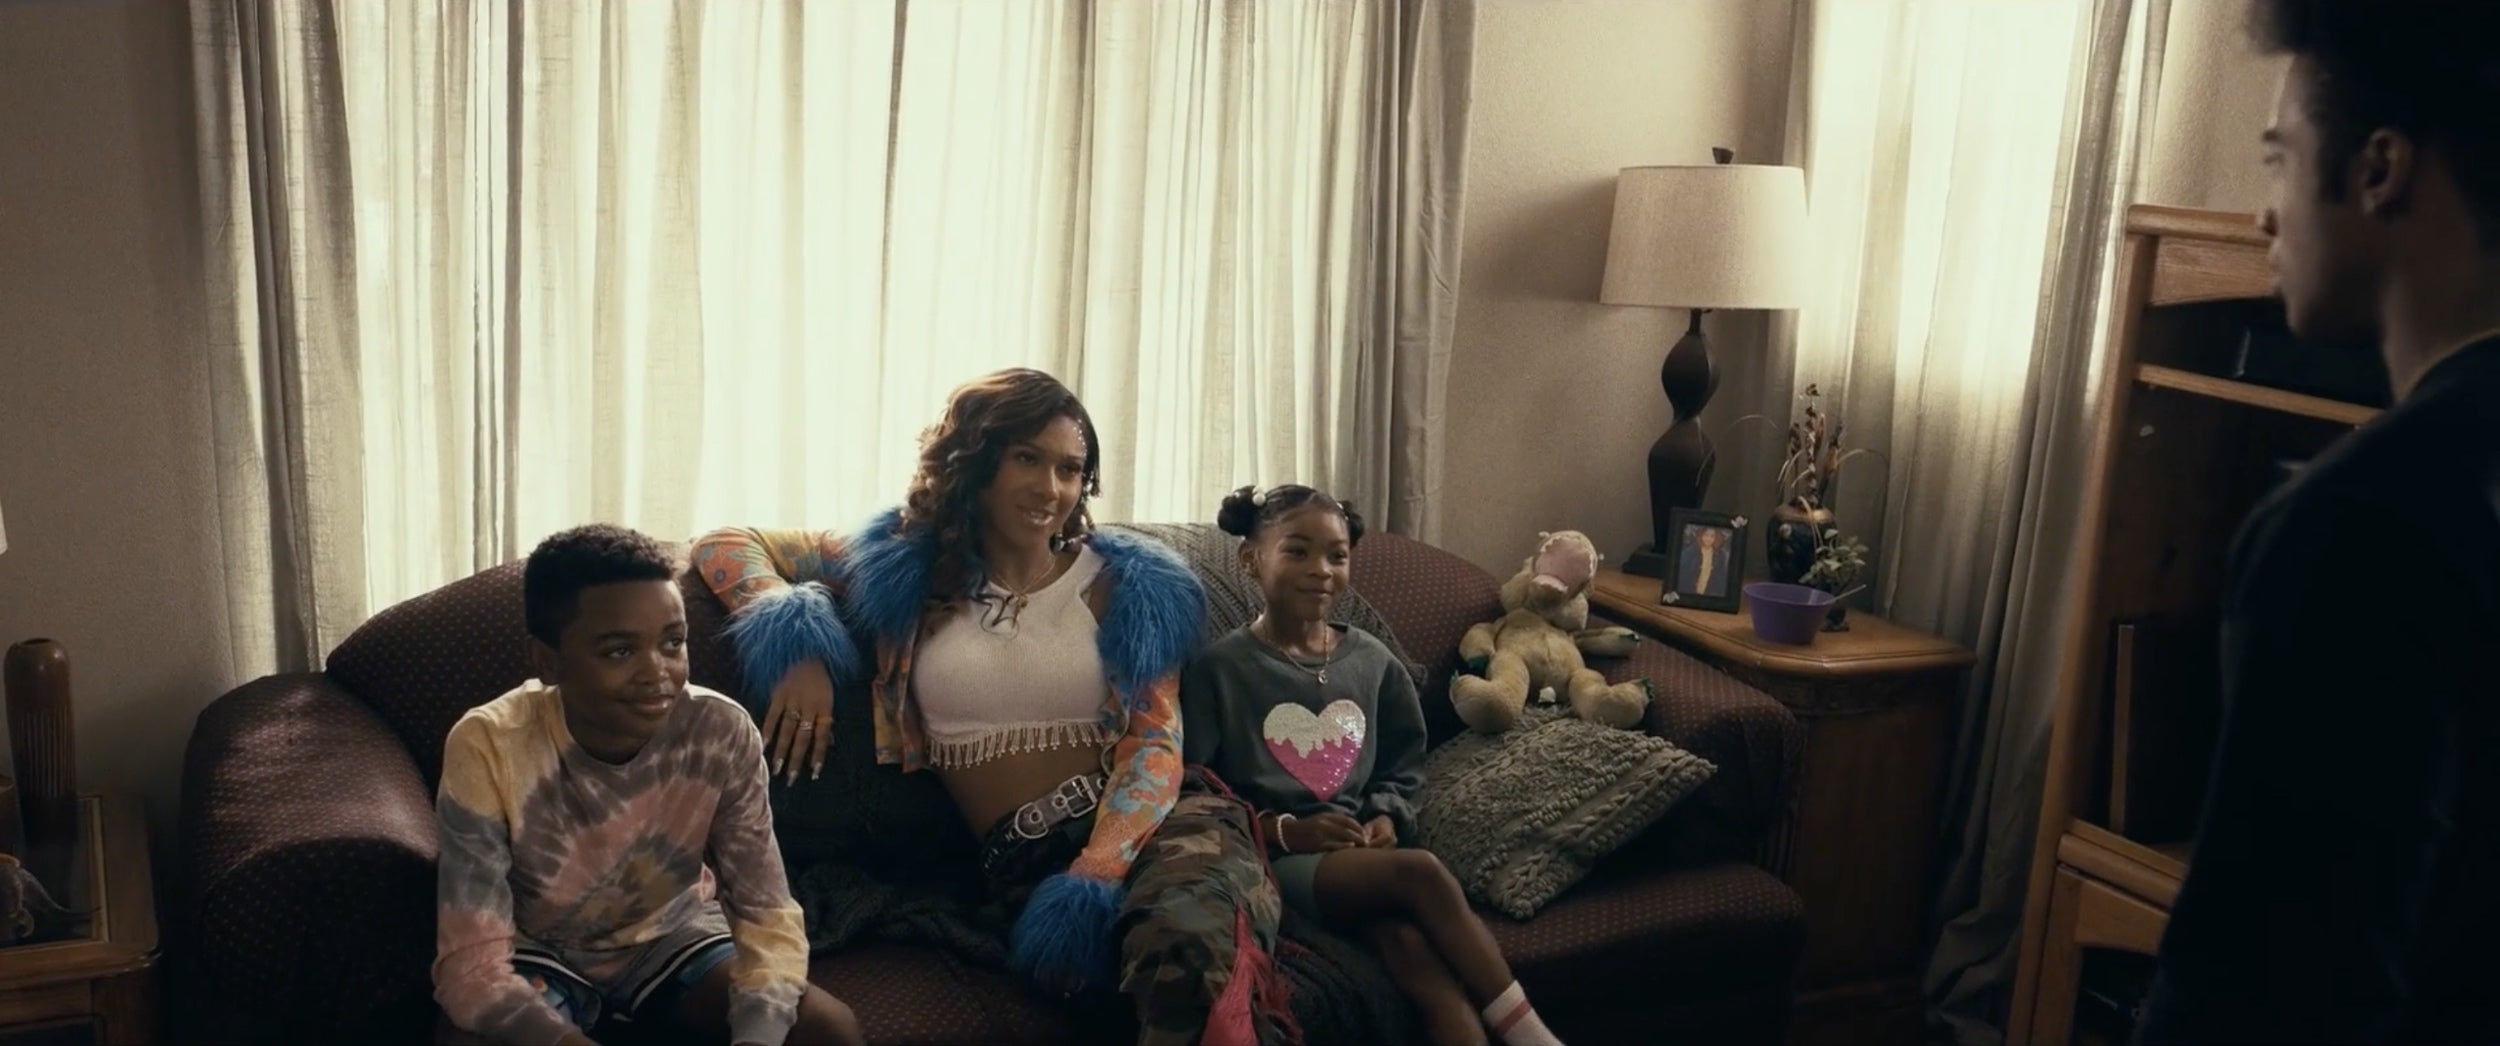 WATCH: Sanaa Lathan, Mike Epps And Algee Smith Star In New Film, ‘YOUNG. WILD. FREE.’